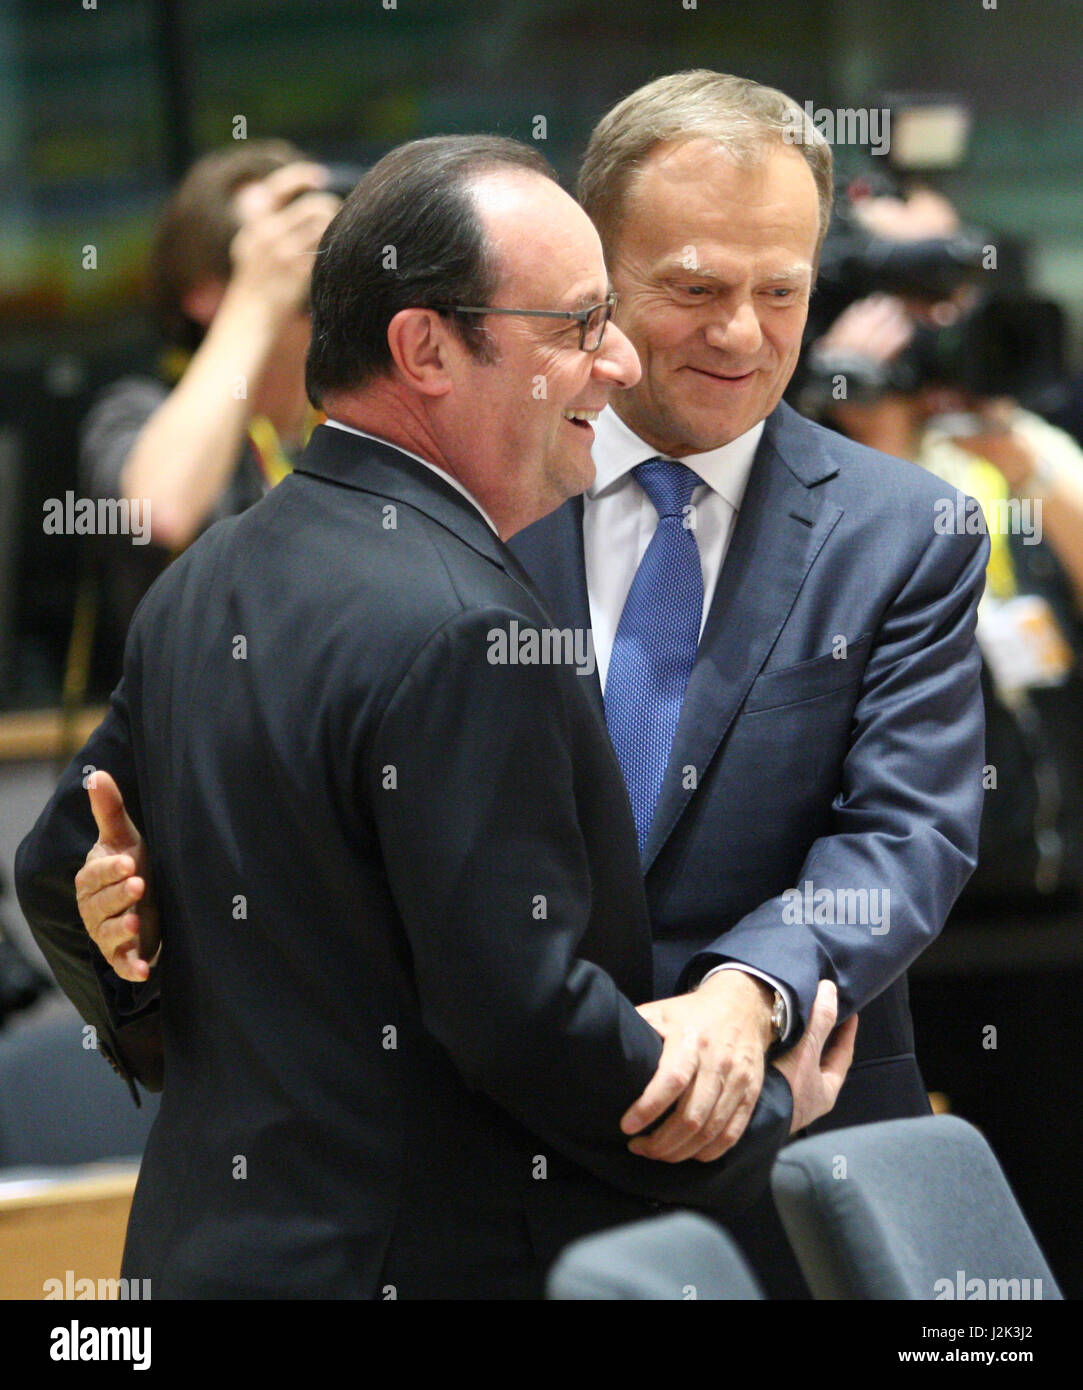 Brussels, Belgium. 29th Apr, 2017. Special Meeting European Council (ART.50) Brexit, round table France President François Hollande greets to European Council President Donald Tusk. Credit: Leo Cavallo/Alamy Live News Stock Photo